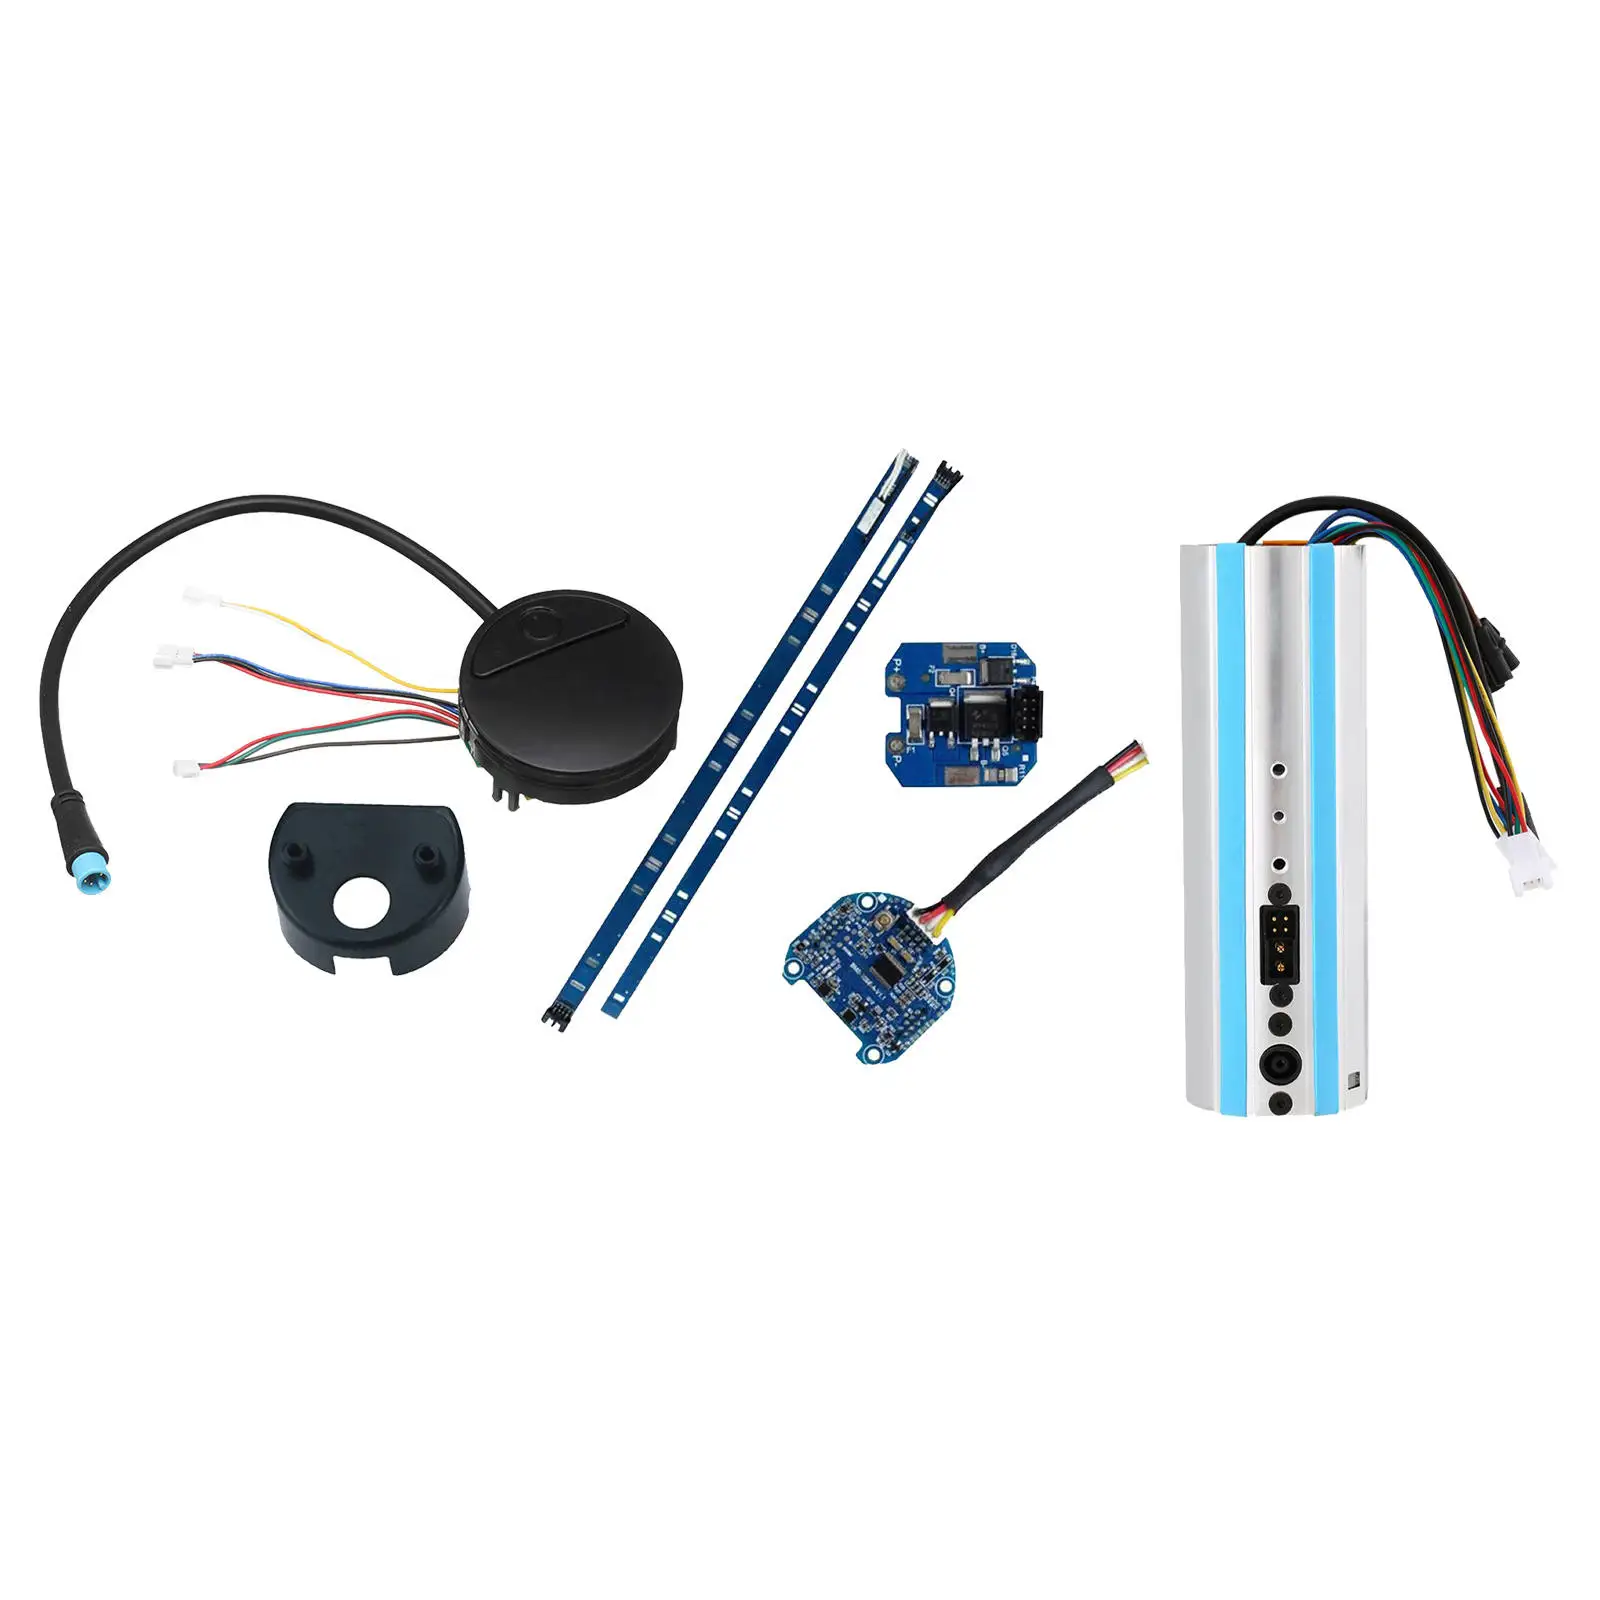 Replacement For Ninebot segways ES1/ES2/ES3/ES4 Electric Scooter Activated Bluetooth Dashboard Control Board Repair Parts